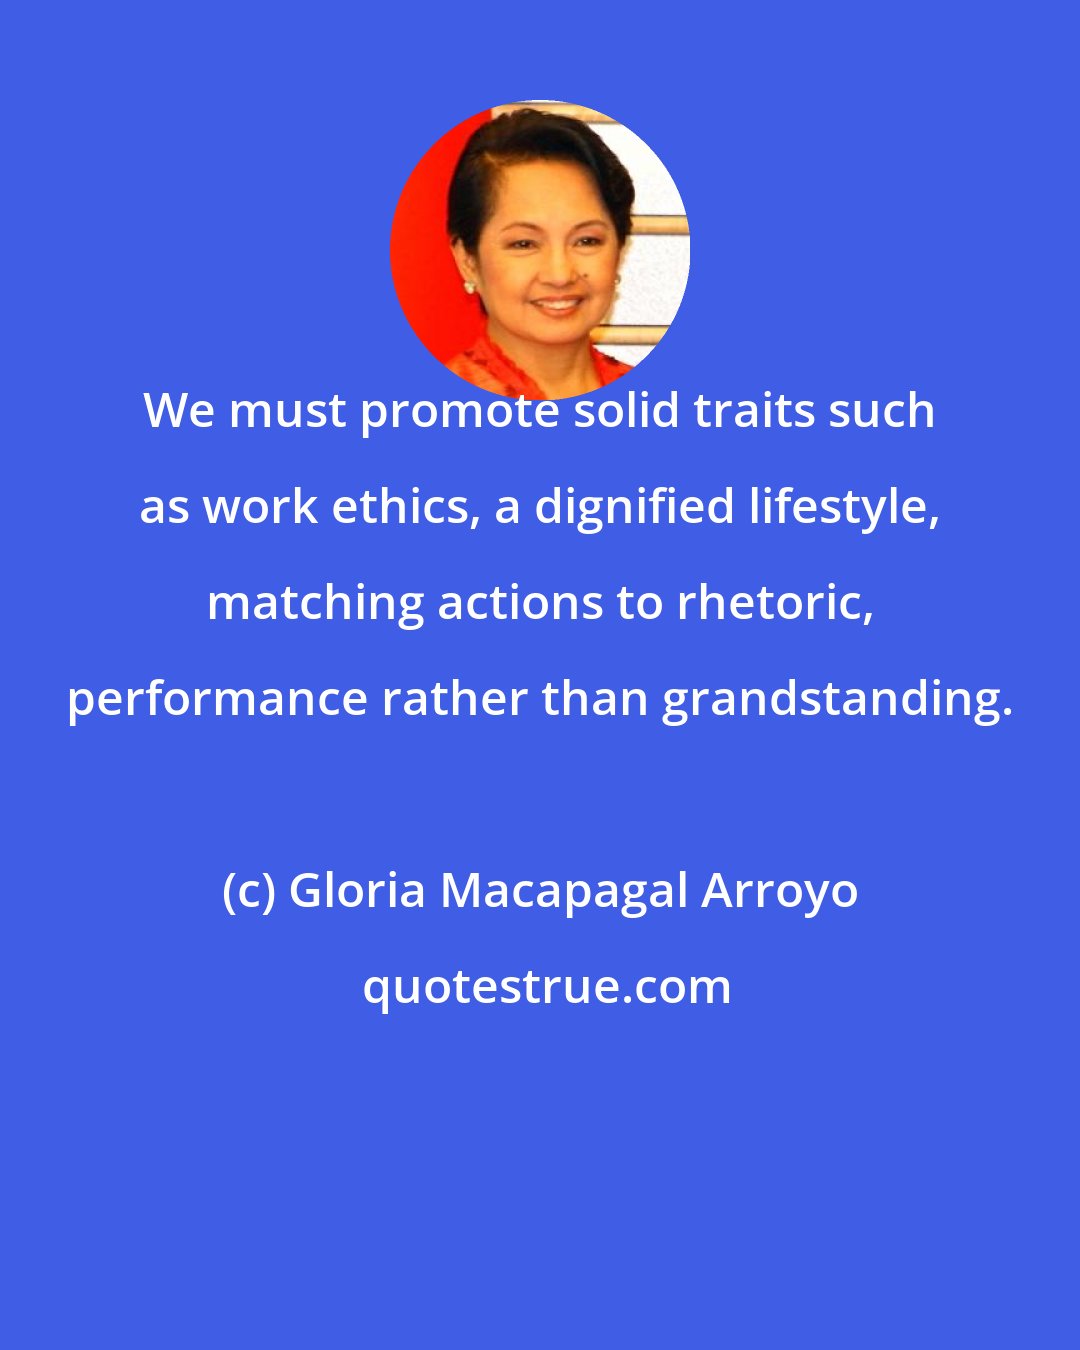 Gloria Macapagal Arroyo: We must promote solid traits such as work ethics, a dignified lifestyle, matching actions to rhetoric, performance rather than grandstanding.